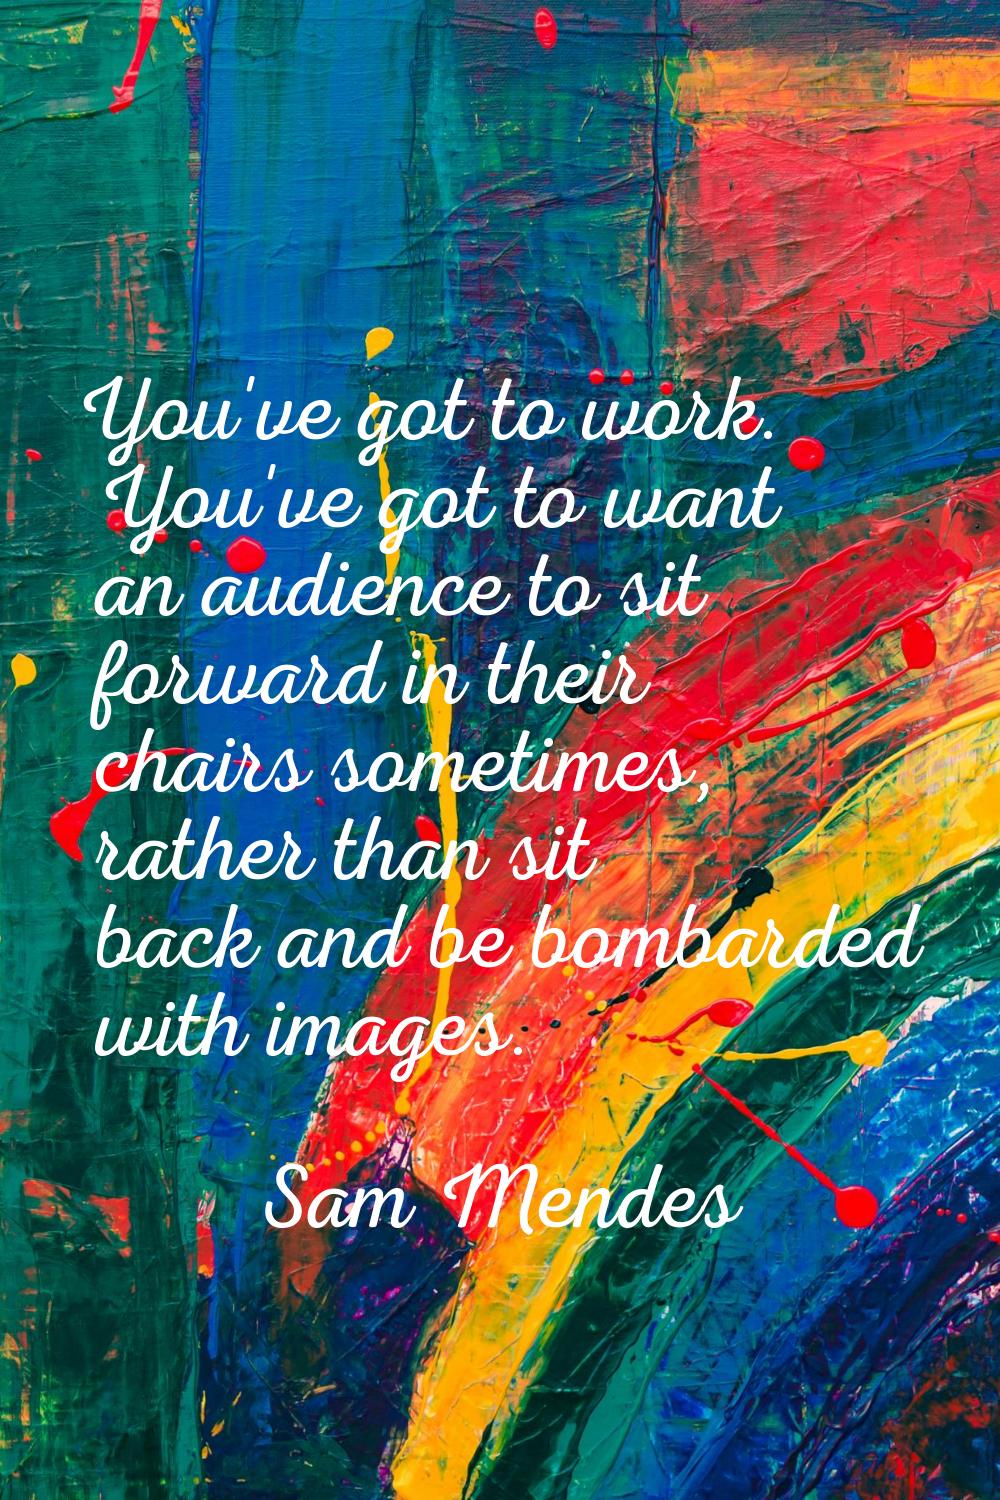 You've got to work. You've got to want an audience to sit forward in their chairs sometimes, rather